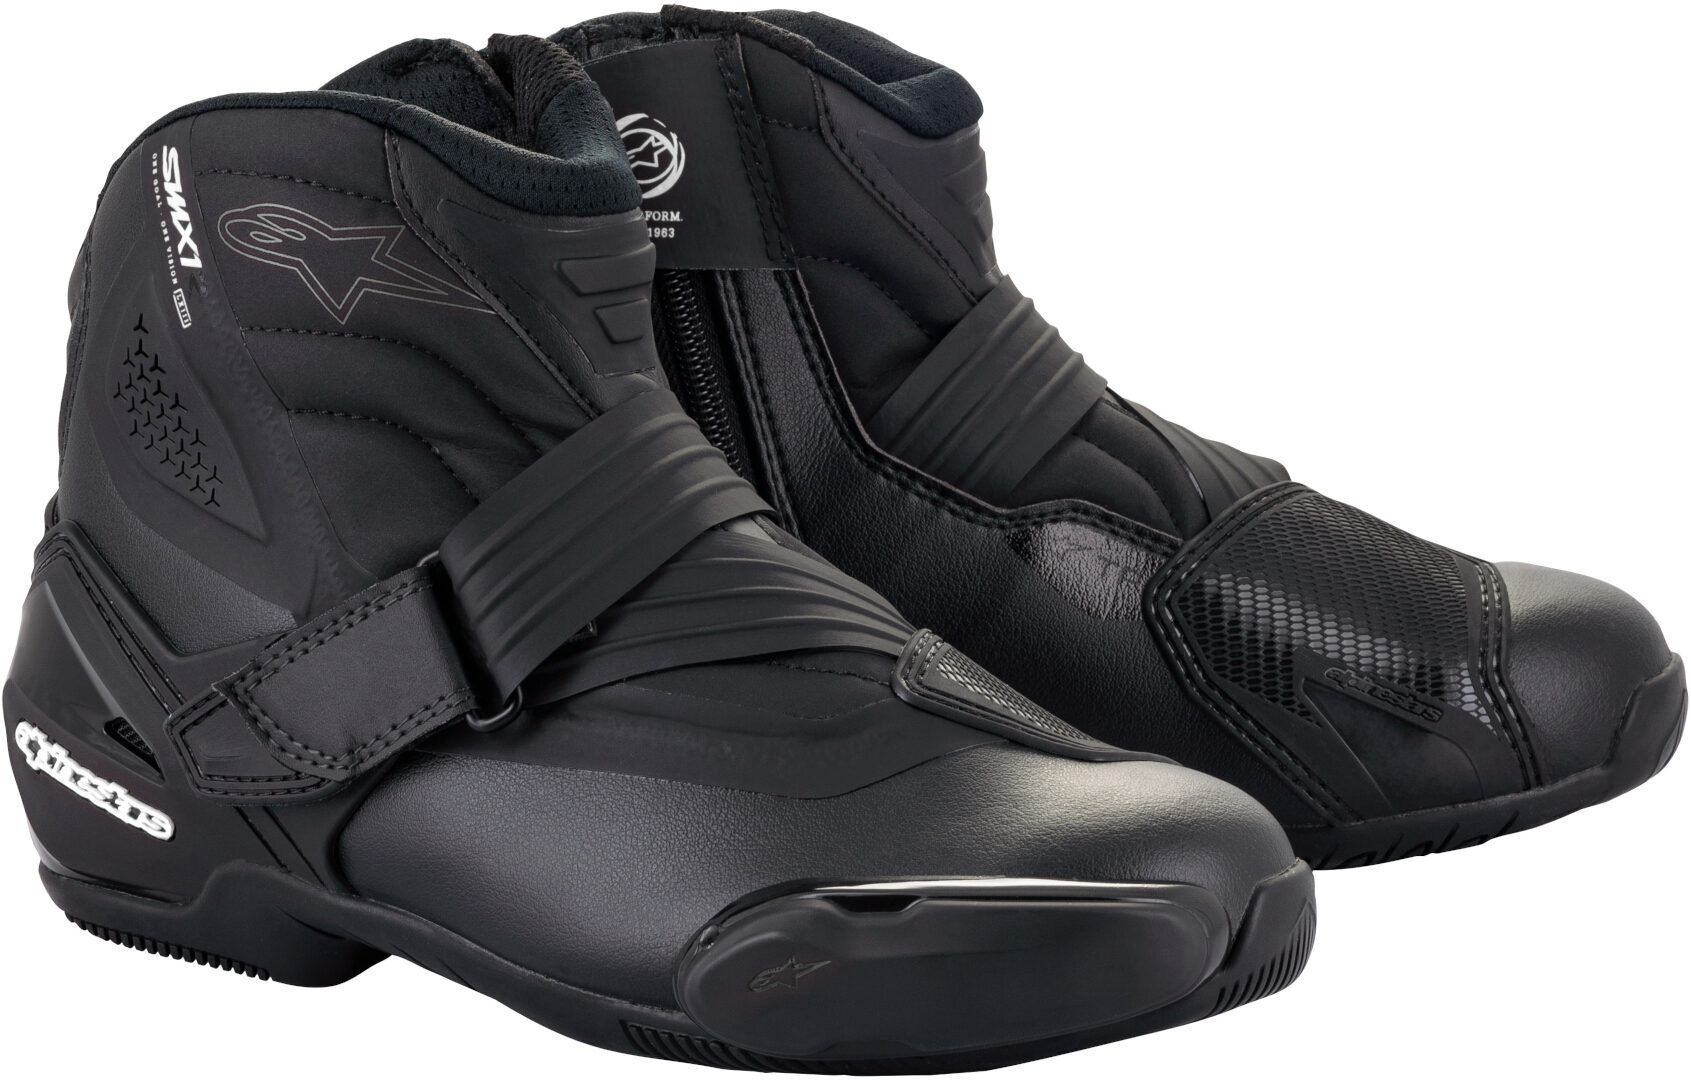 Photos - Motorcycle Boots Alpinestars Stella Smx-1 R V2 Ladies Motorcycle Shoes Female Black Size: 4 